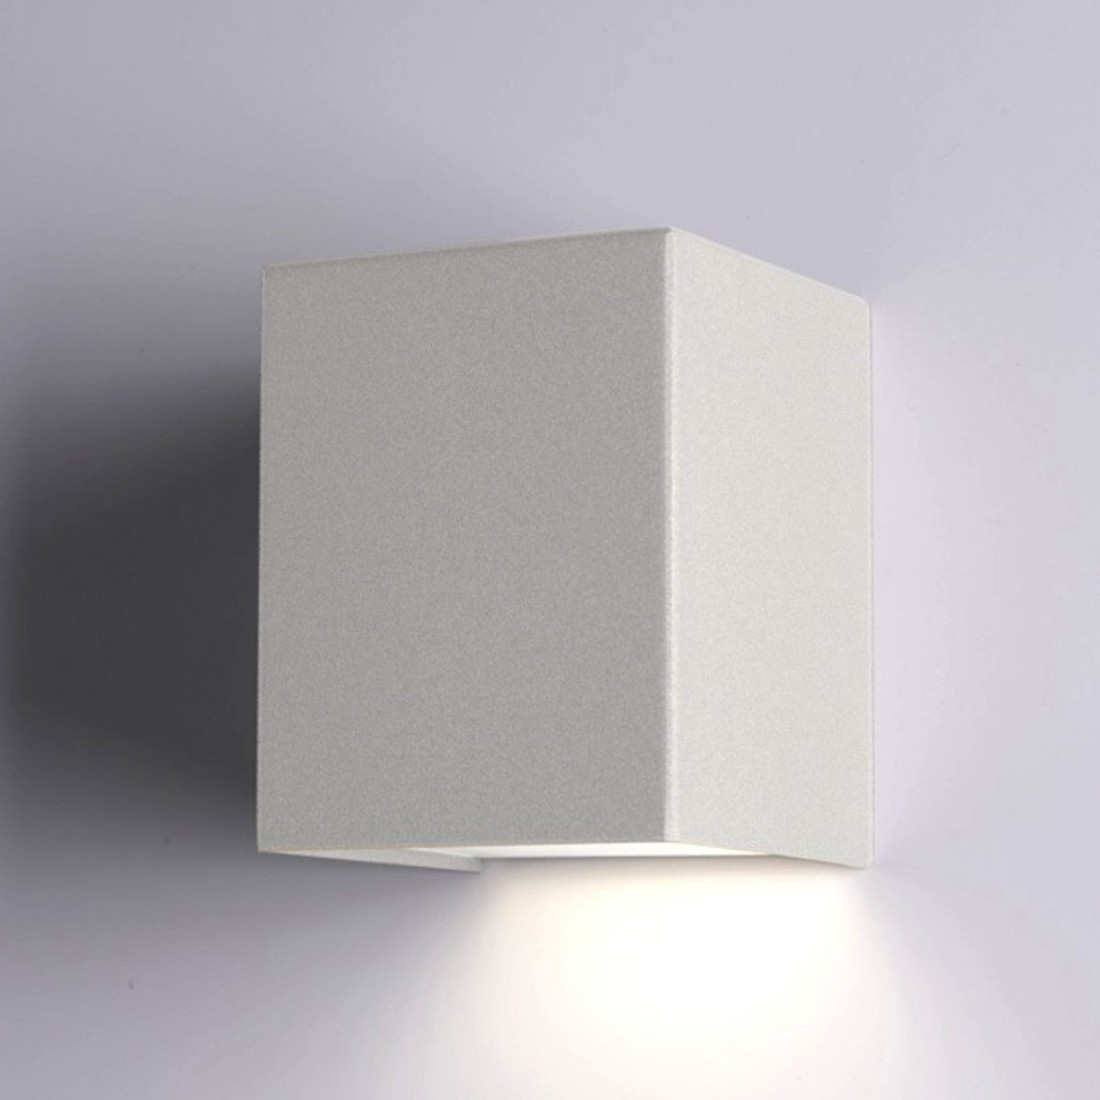 Applique murale LED moderne CUBICK 899 7A Cattaneo lighting